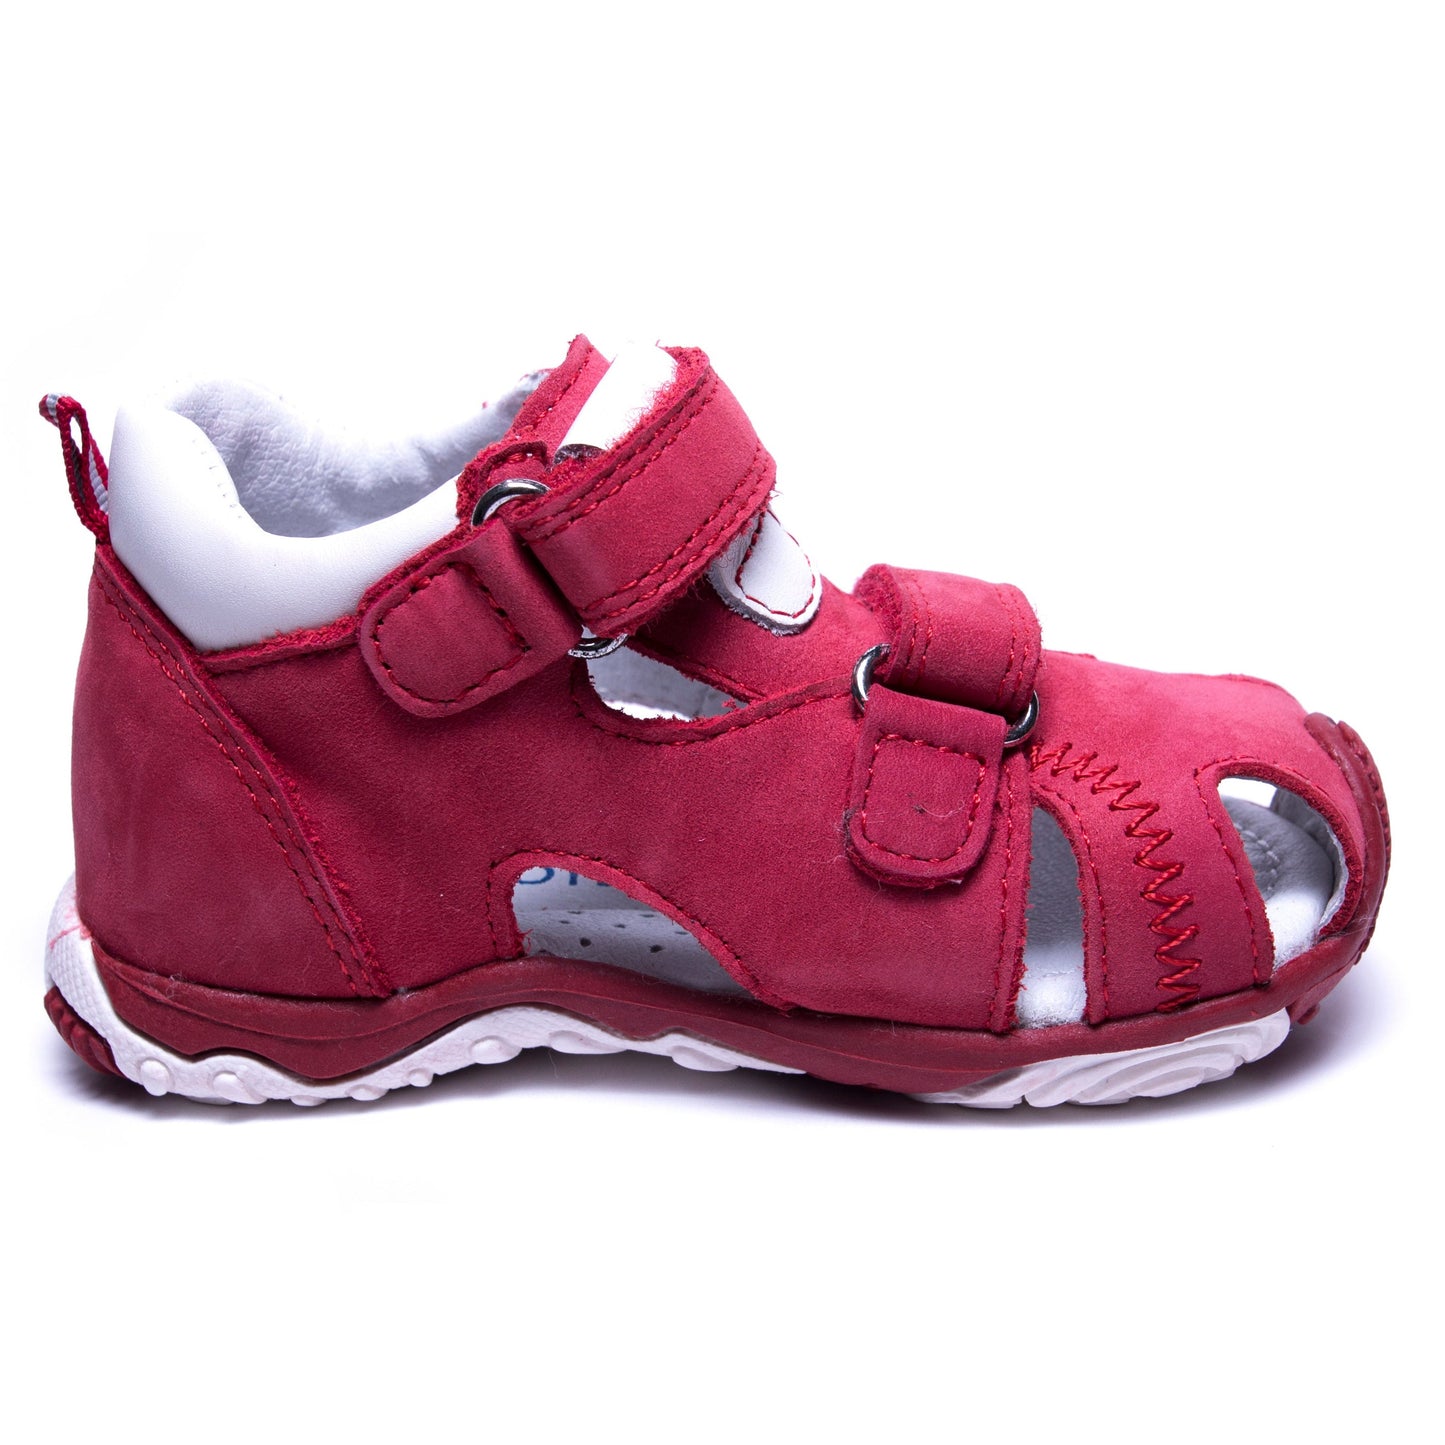 ARIS red toddler girl/boy arch support sandals - feelgoodshoes.ae